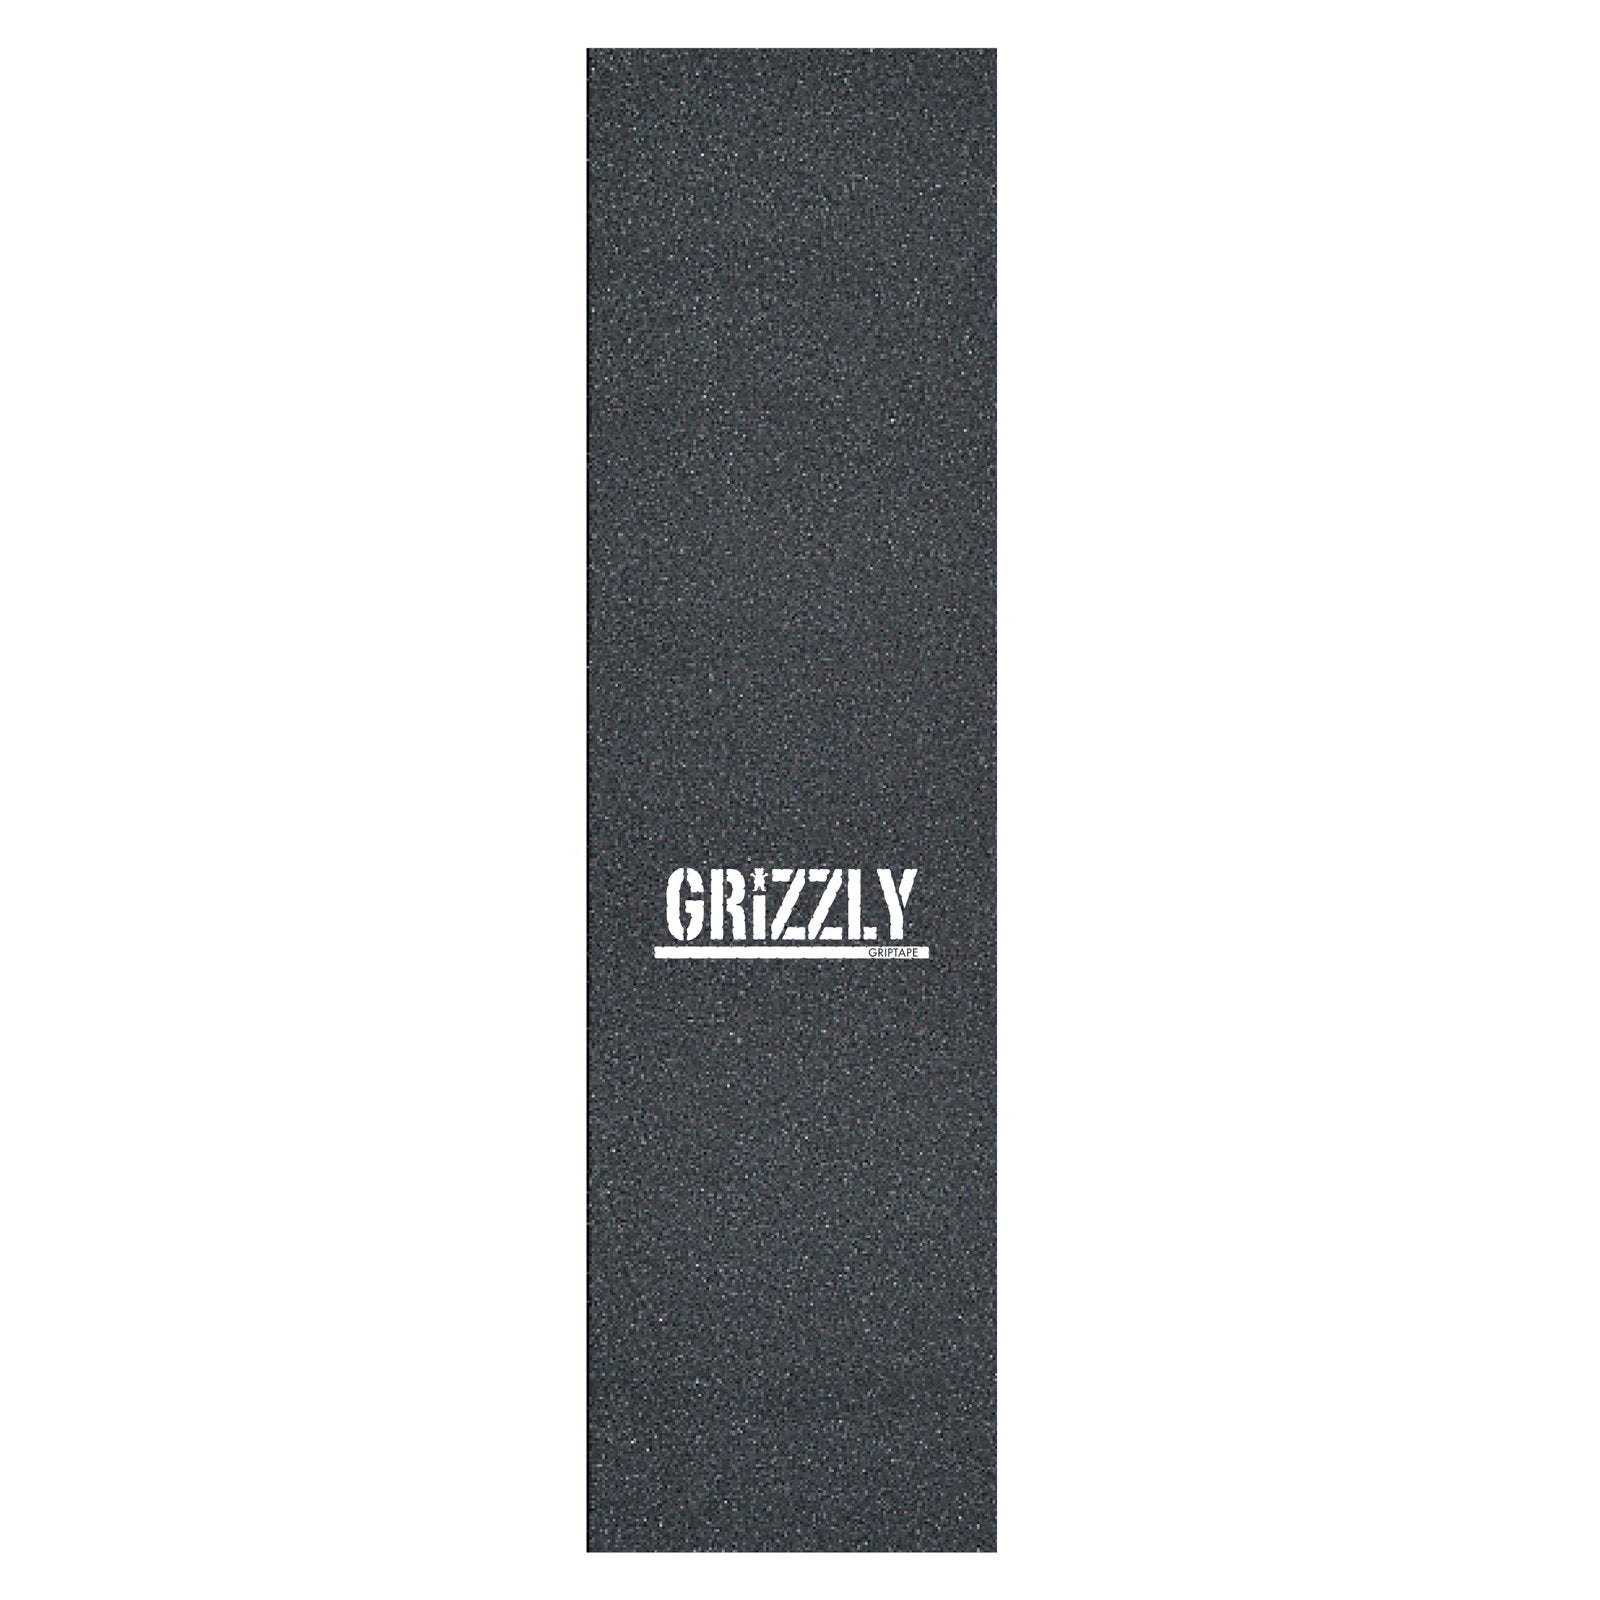 Tramp Stamp Grizzly Skateboard Grip Tape